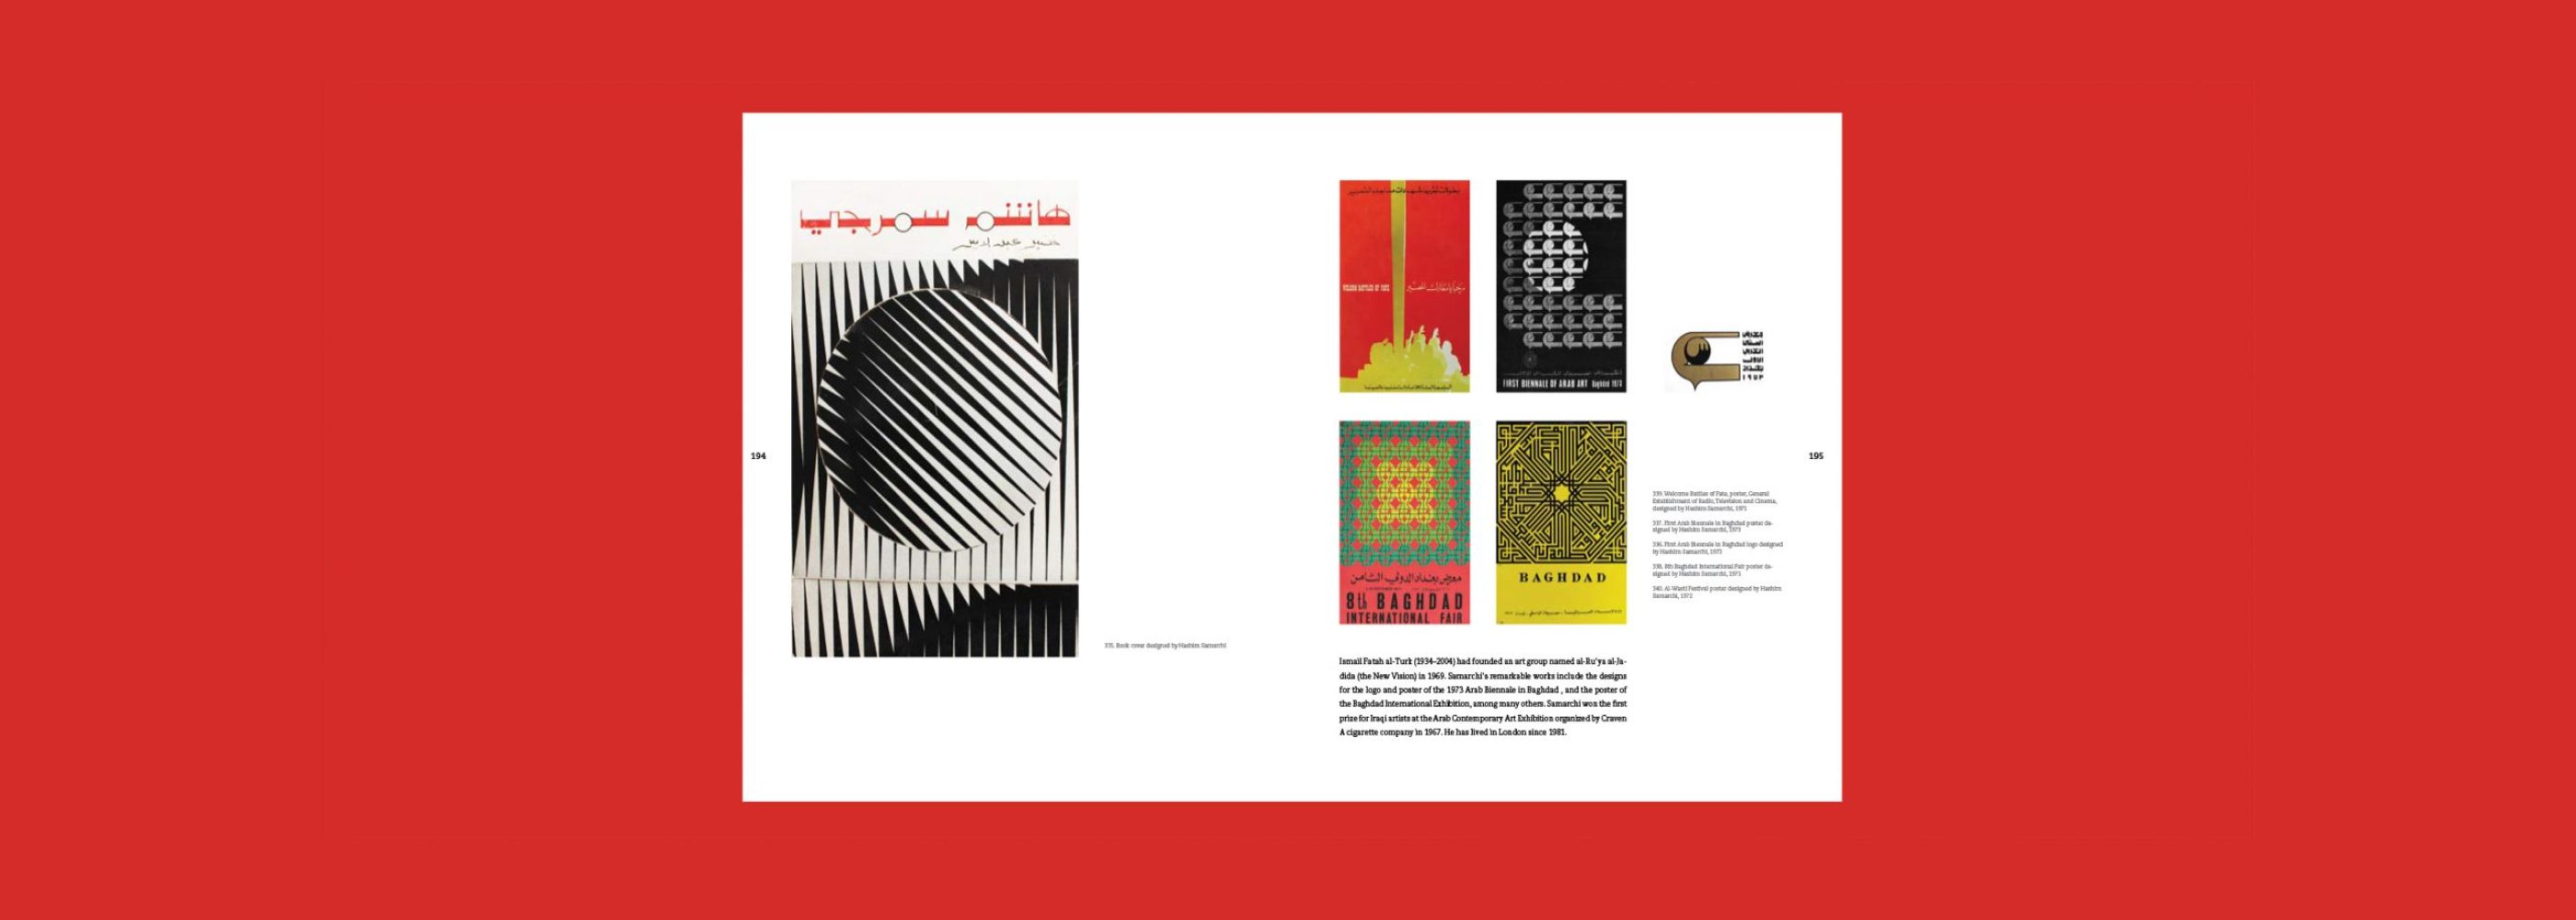 a-history-arab-graphic-design_0008_Background copy